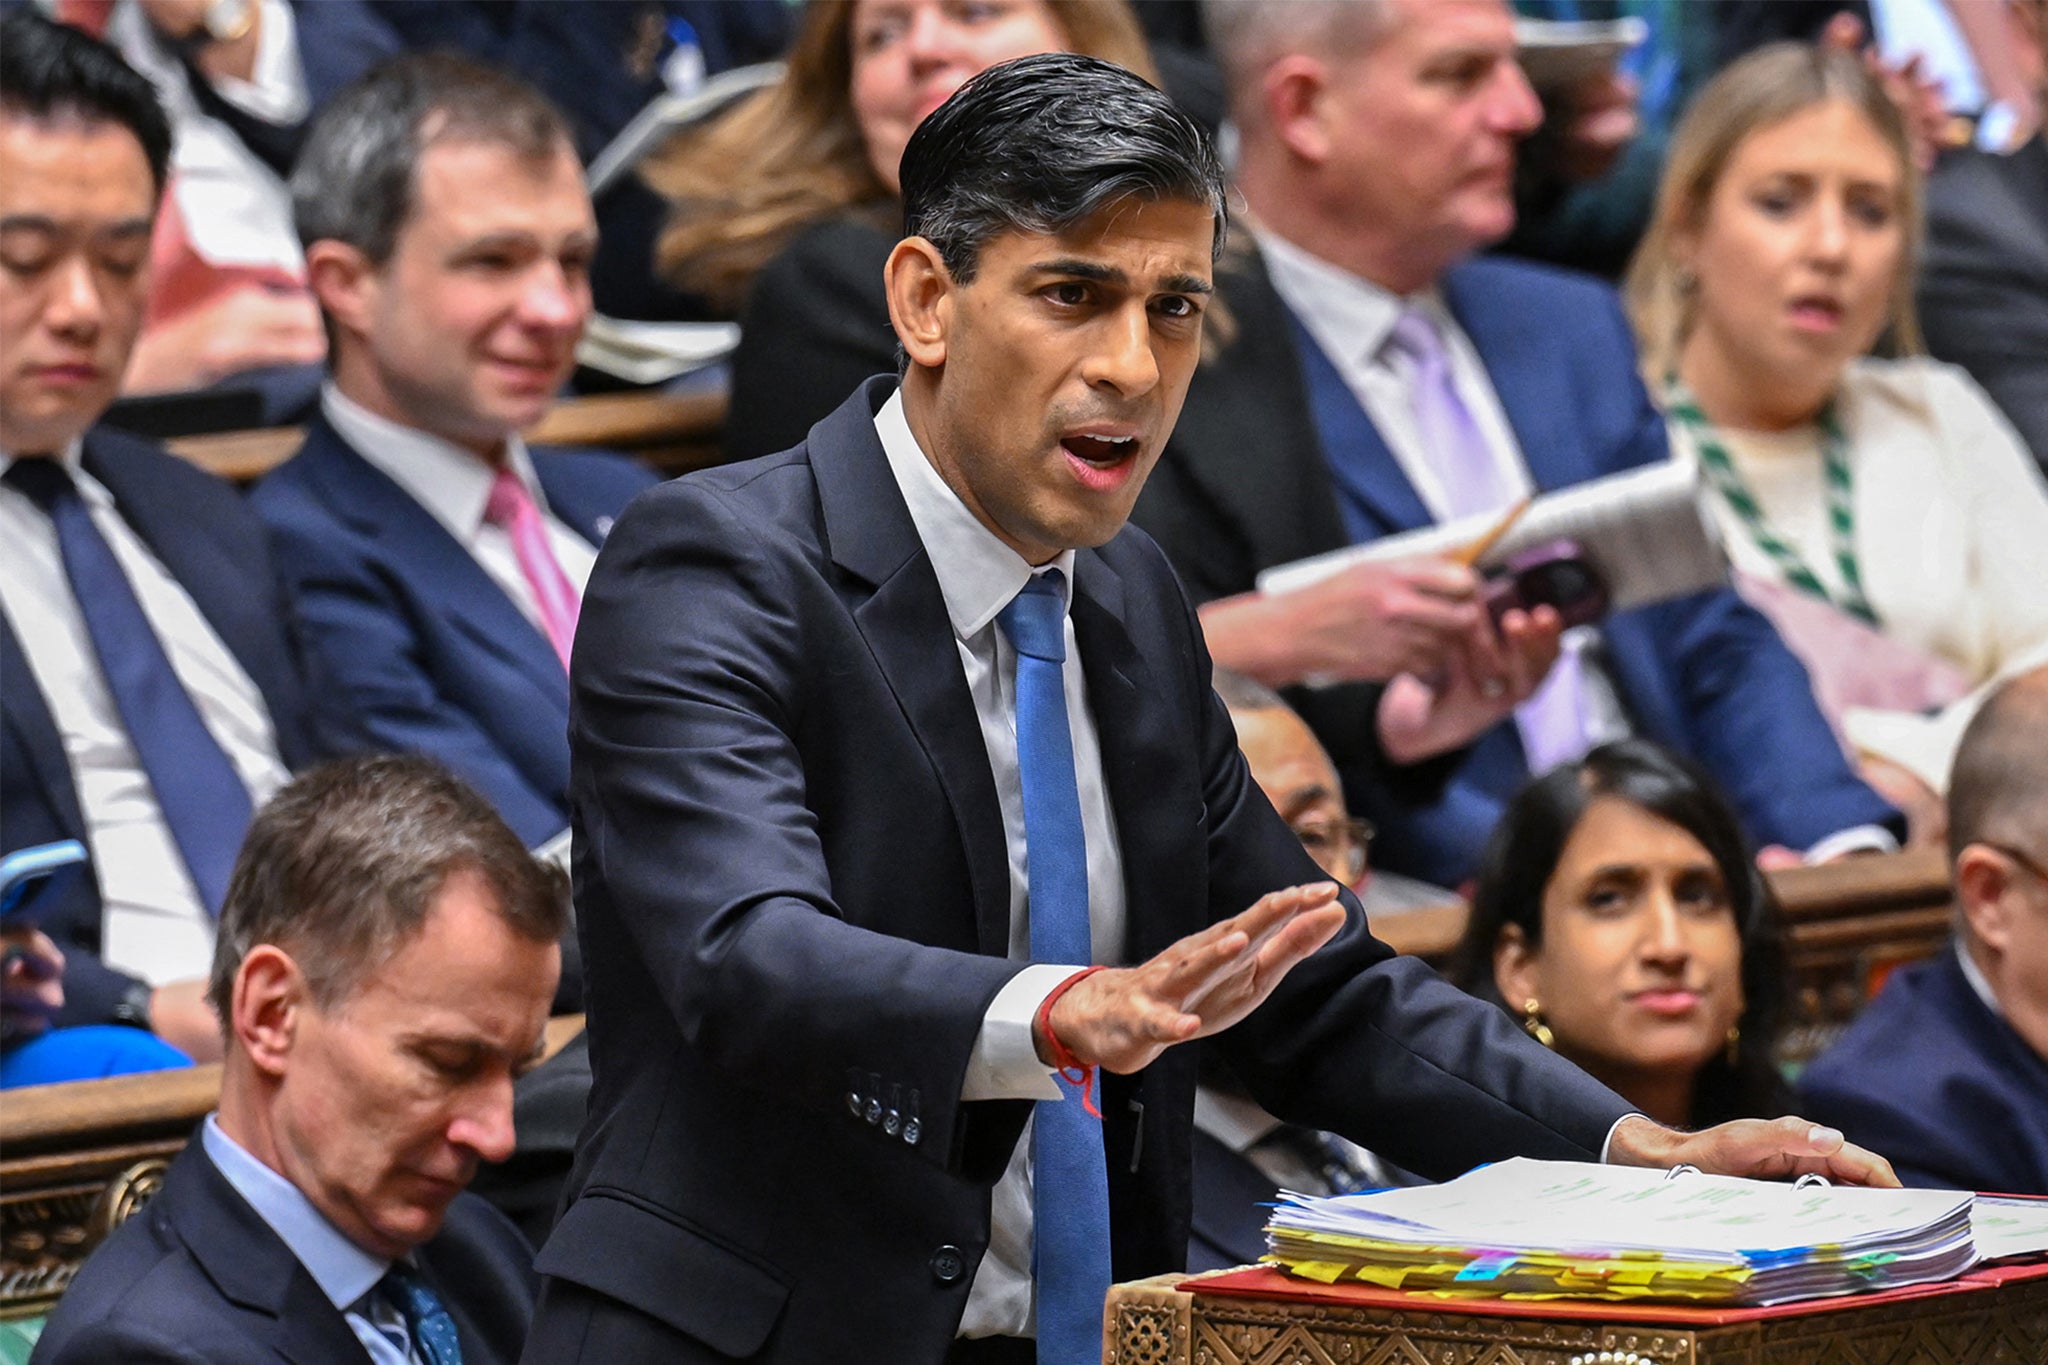 Rishi Sunak briefed his cabinet on the strikes against Houthis in Yemen, but the House of Commons has yet to discuss the matter